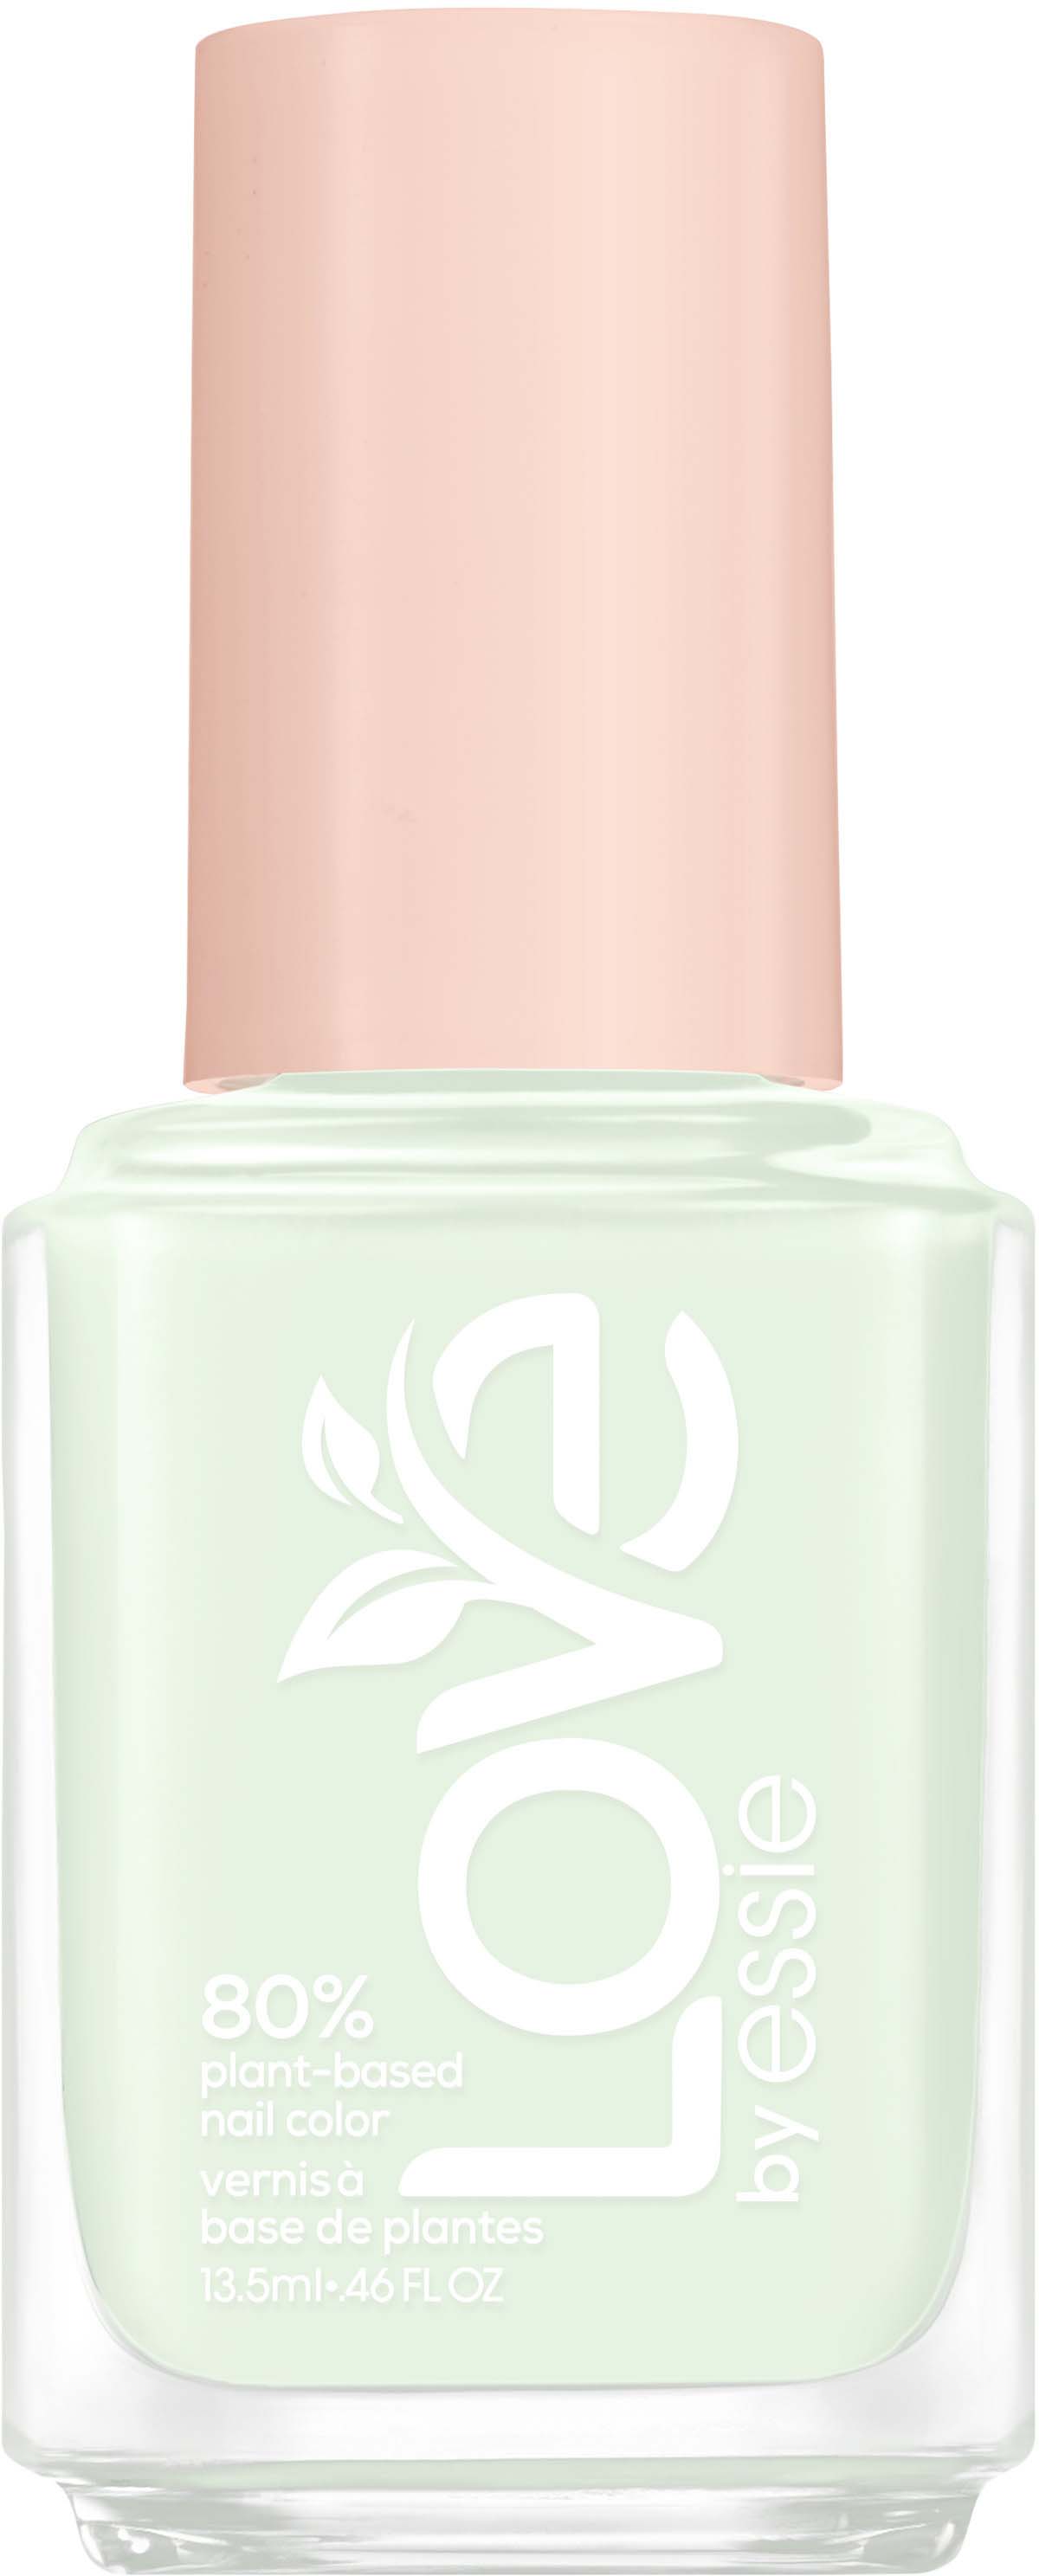 Essie LOVE by Essie Revive To Nail 80% Plant-based Color 220 Thrive